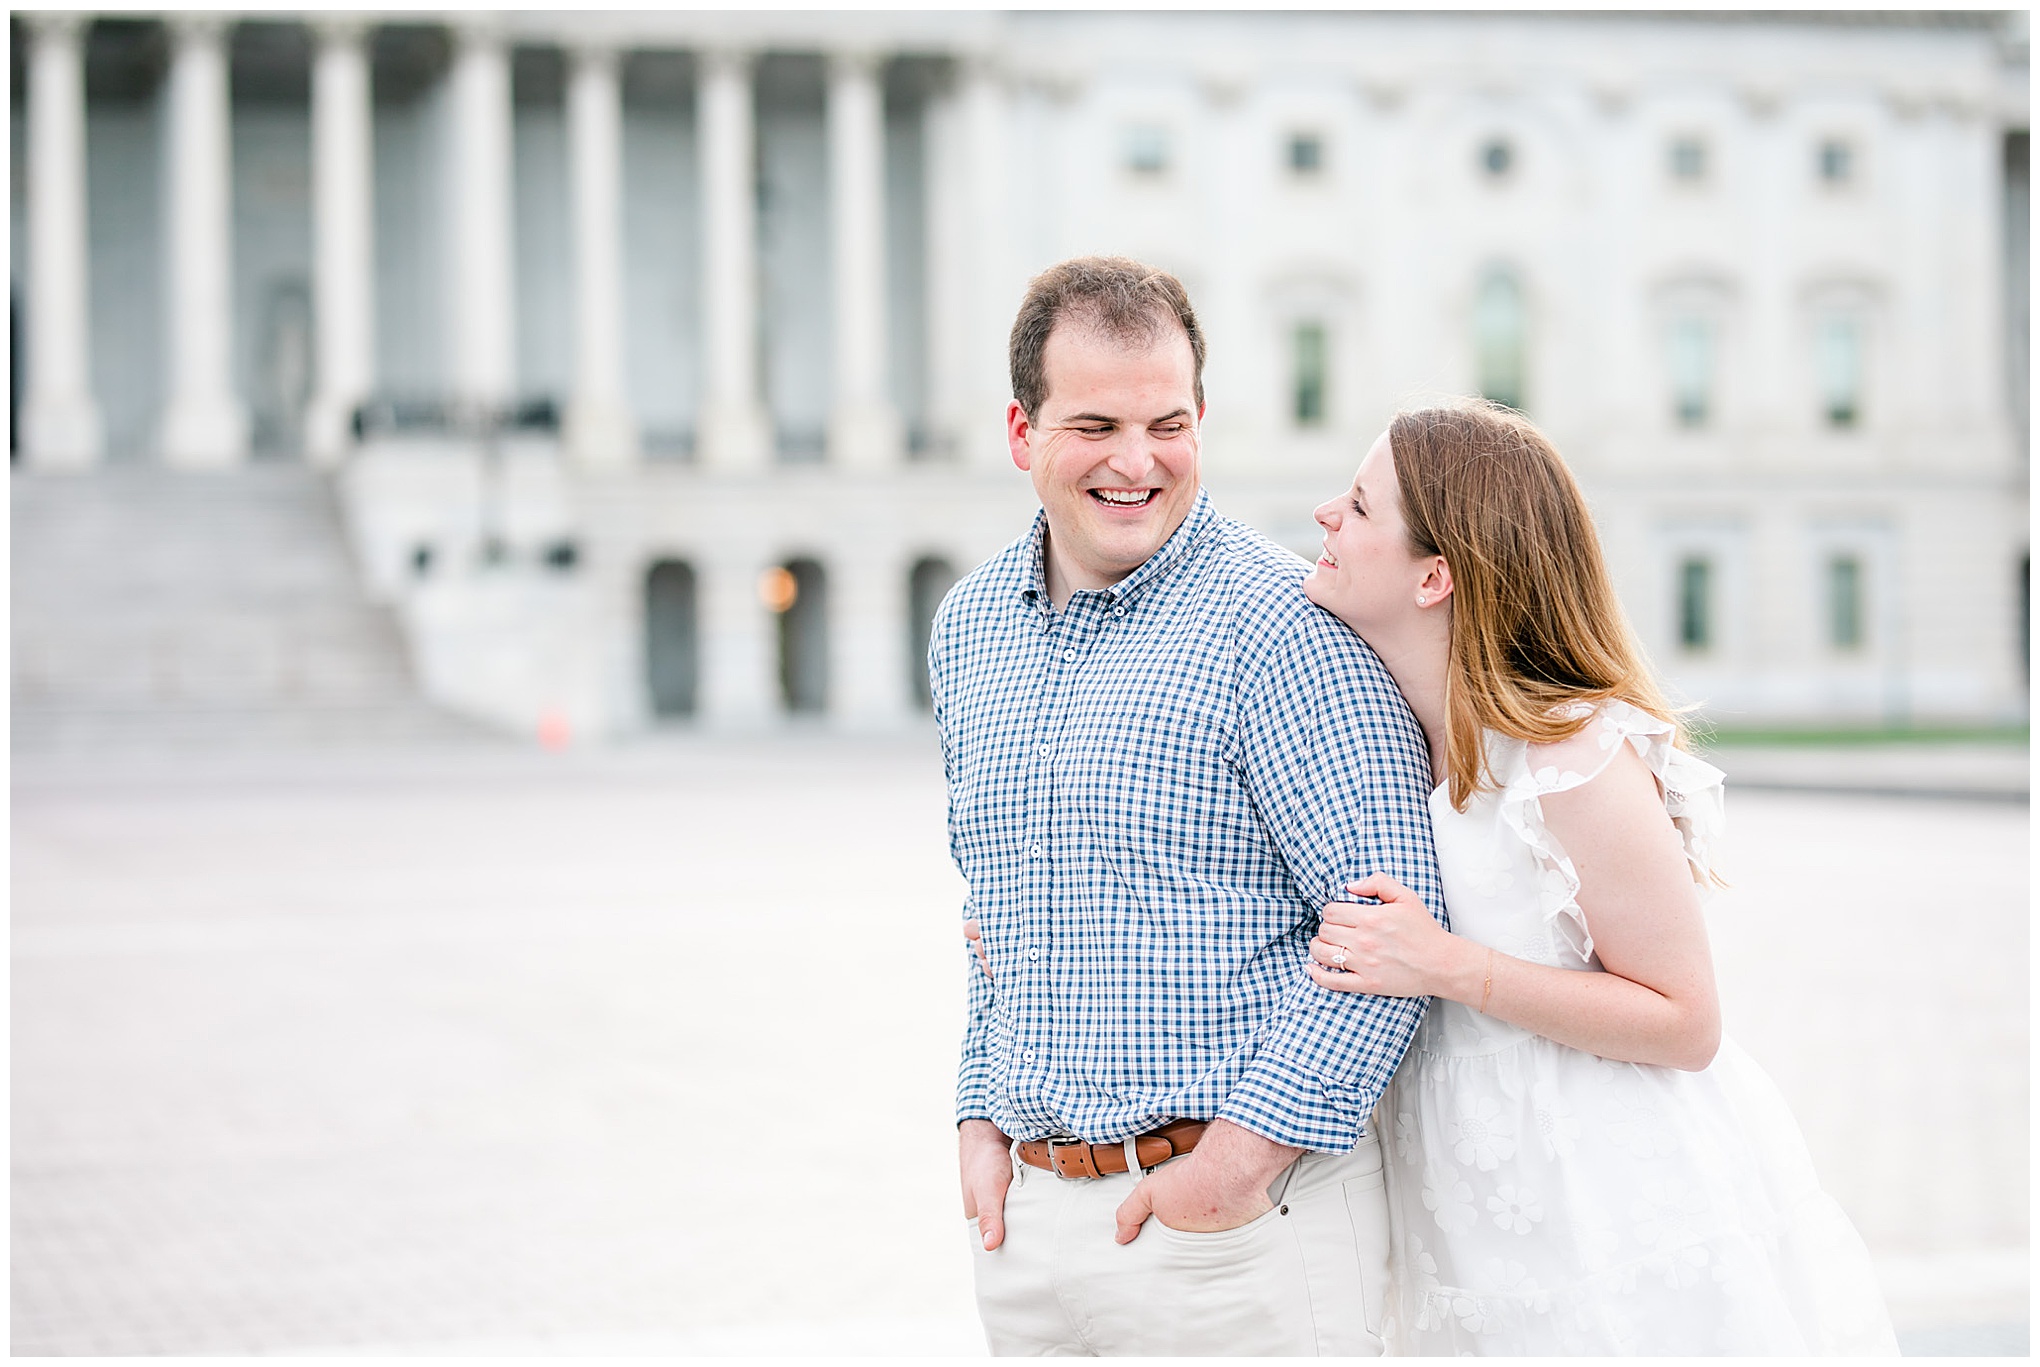 U.S. Capitol engagement photos, Capitol Hill engagement photos, D.C. engagement photos, Rachel E.H. Photography, garden engagement photos, U.S. Supreme Court gardens, rose garden engagement photos, pink rose bushes, spring engagement photos, neutral outfits, engagement session outfit ideas, Capitol dome, couple laughing